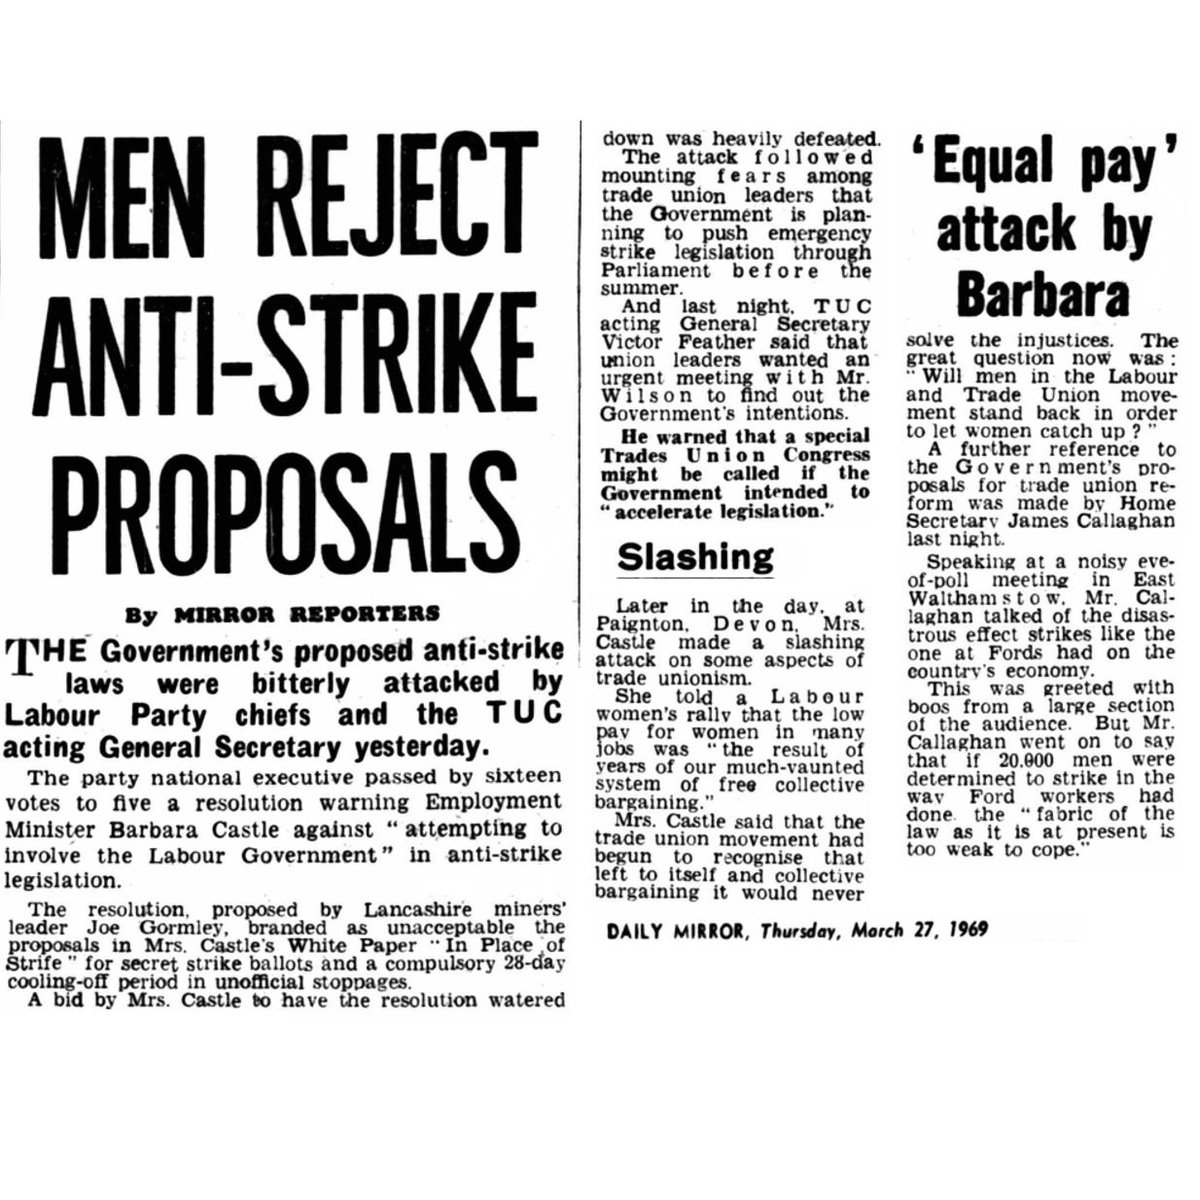 33. While it is true the strike at Ford led to the TUC equal pay motion, and strikes, at that time Barbara Castle was trying to prevent strikes and blaming the wage gap on the free collective bargaining of the unions. She even went as far as complaining about the Ford strike.